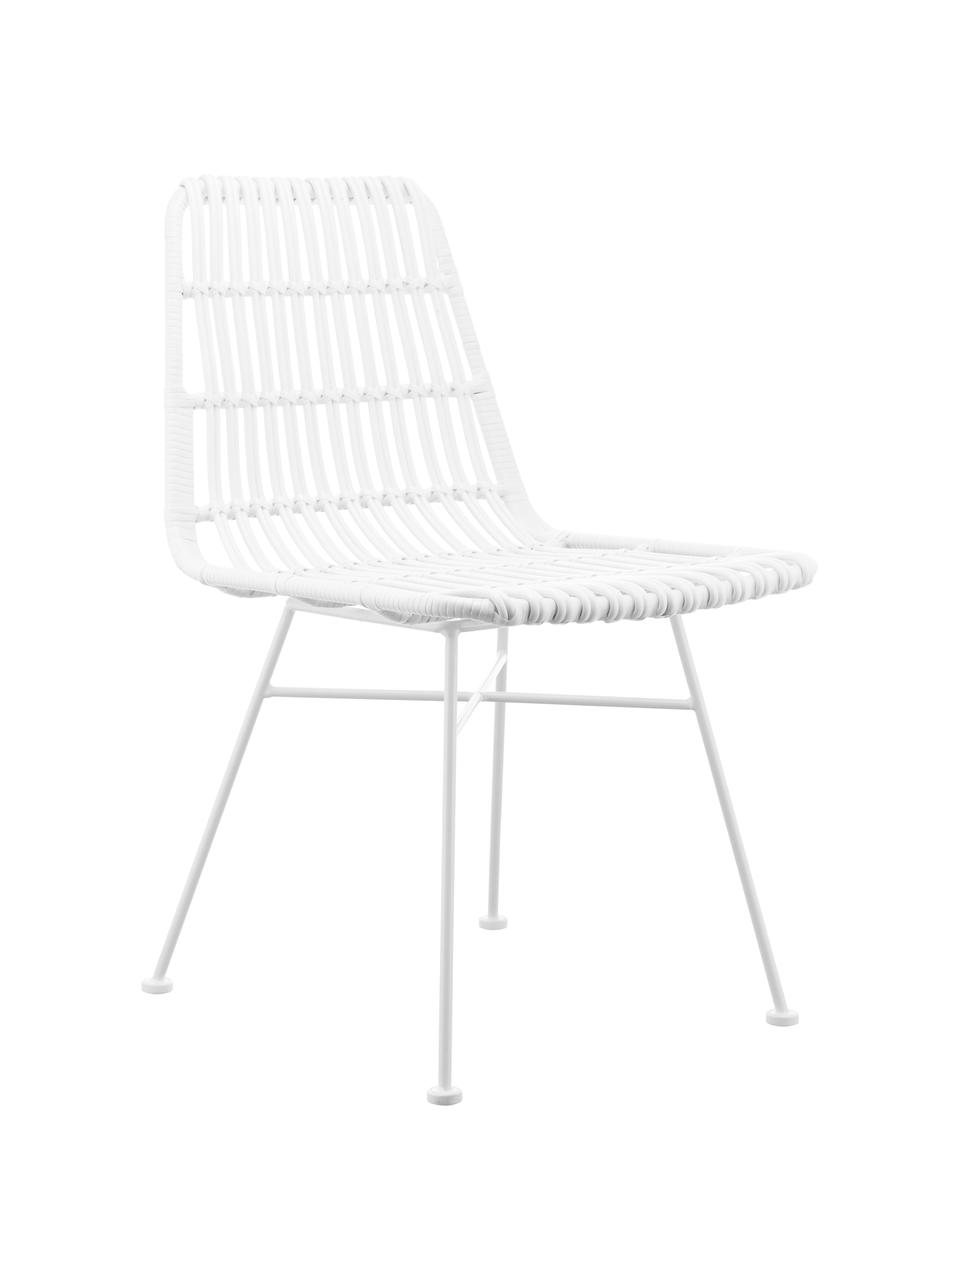 Chaise polyrotin Costa, 2 pièces, Assise : blanc Structure : blanc, mat, larg. 47 x prof. 61 cm